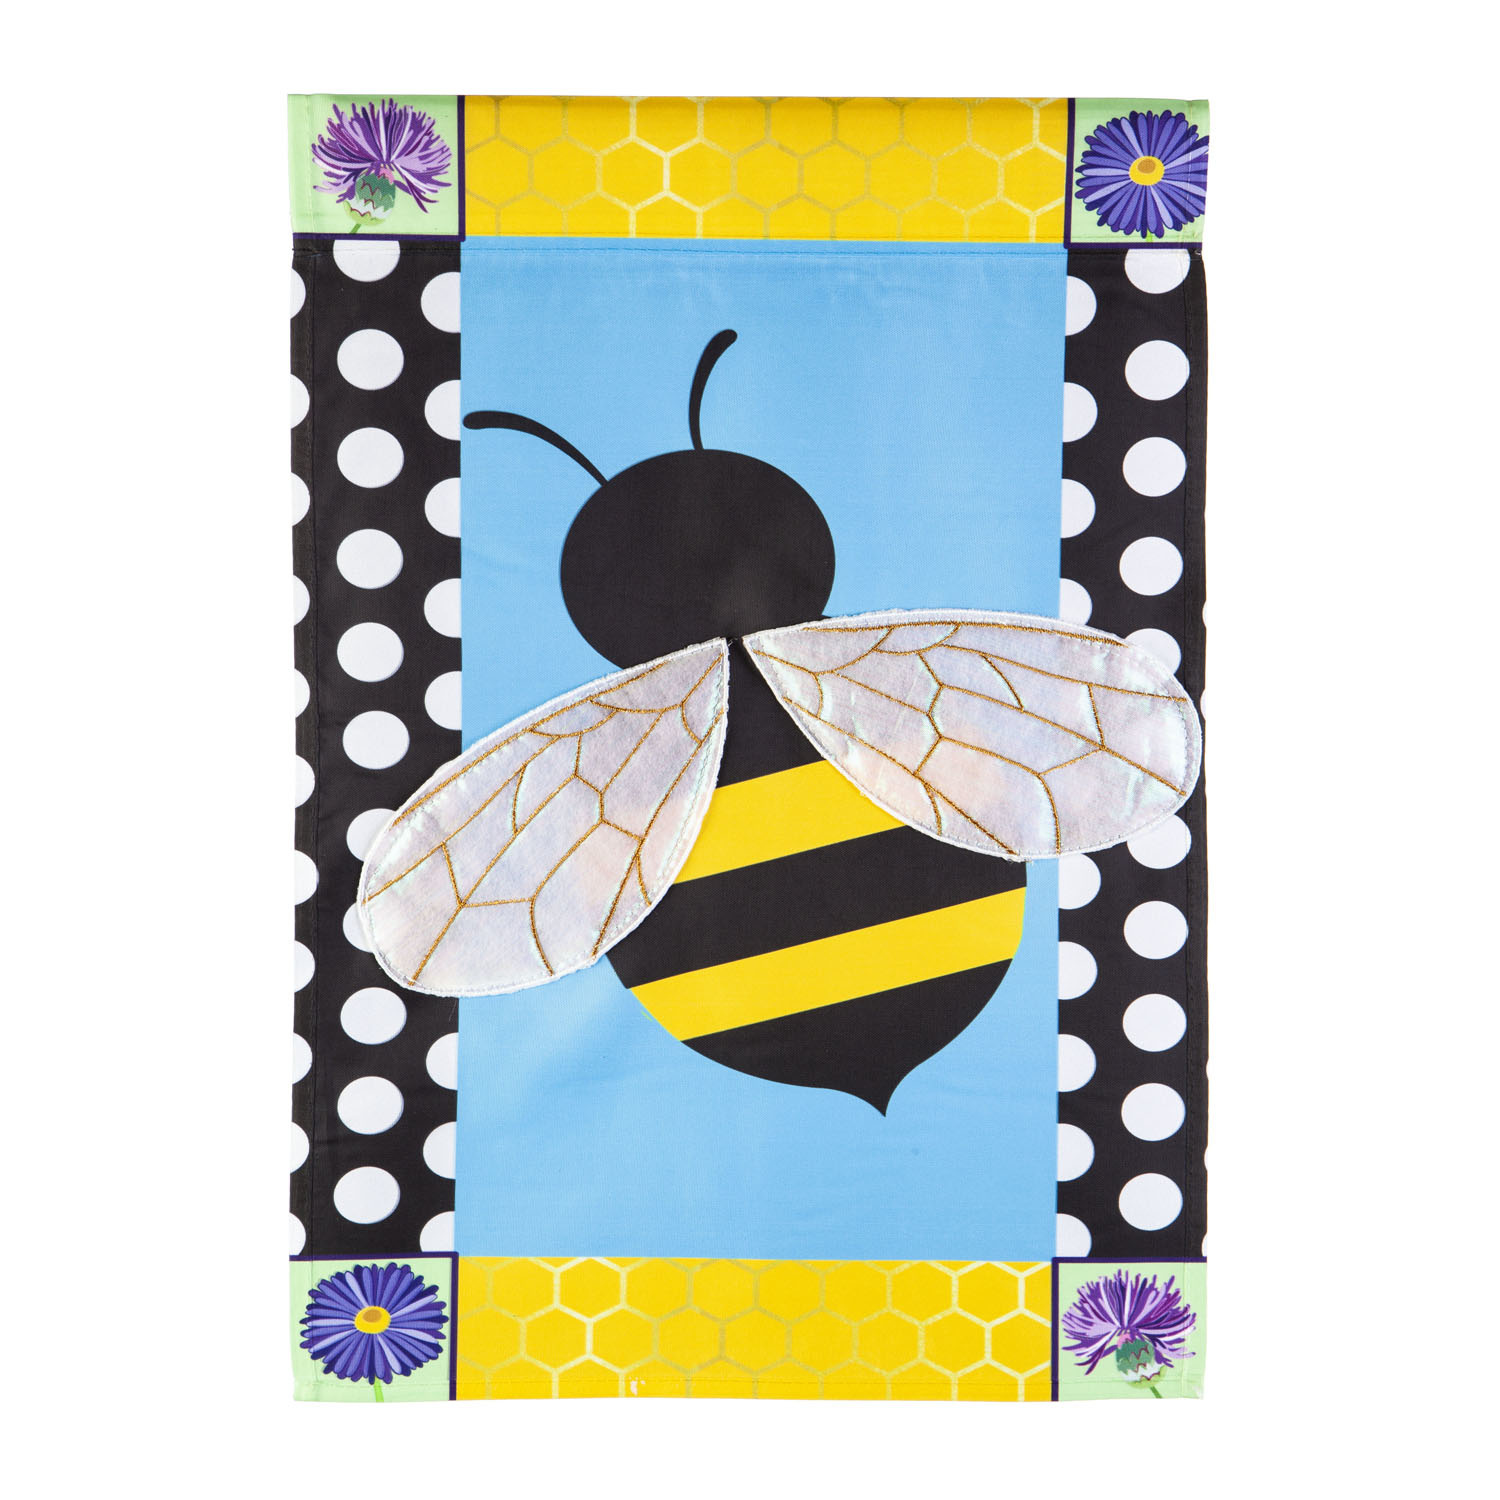 Details about   Honey Bee in Ring of Sunflower & Daisy Flowers Summer decorative Garden flag 